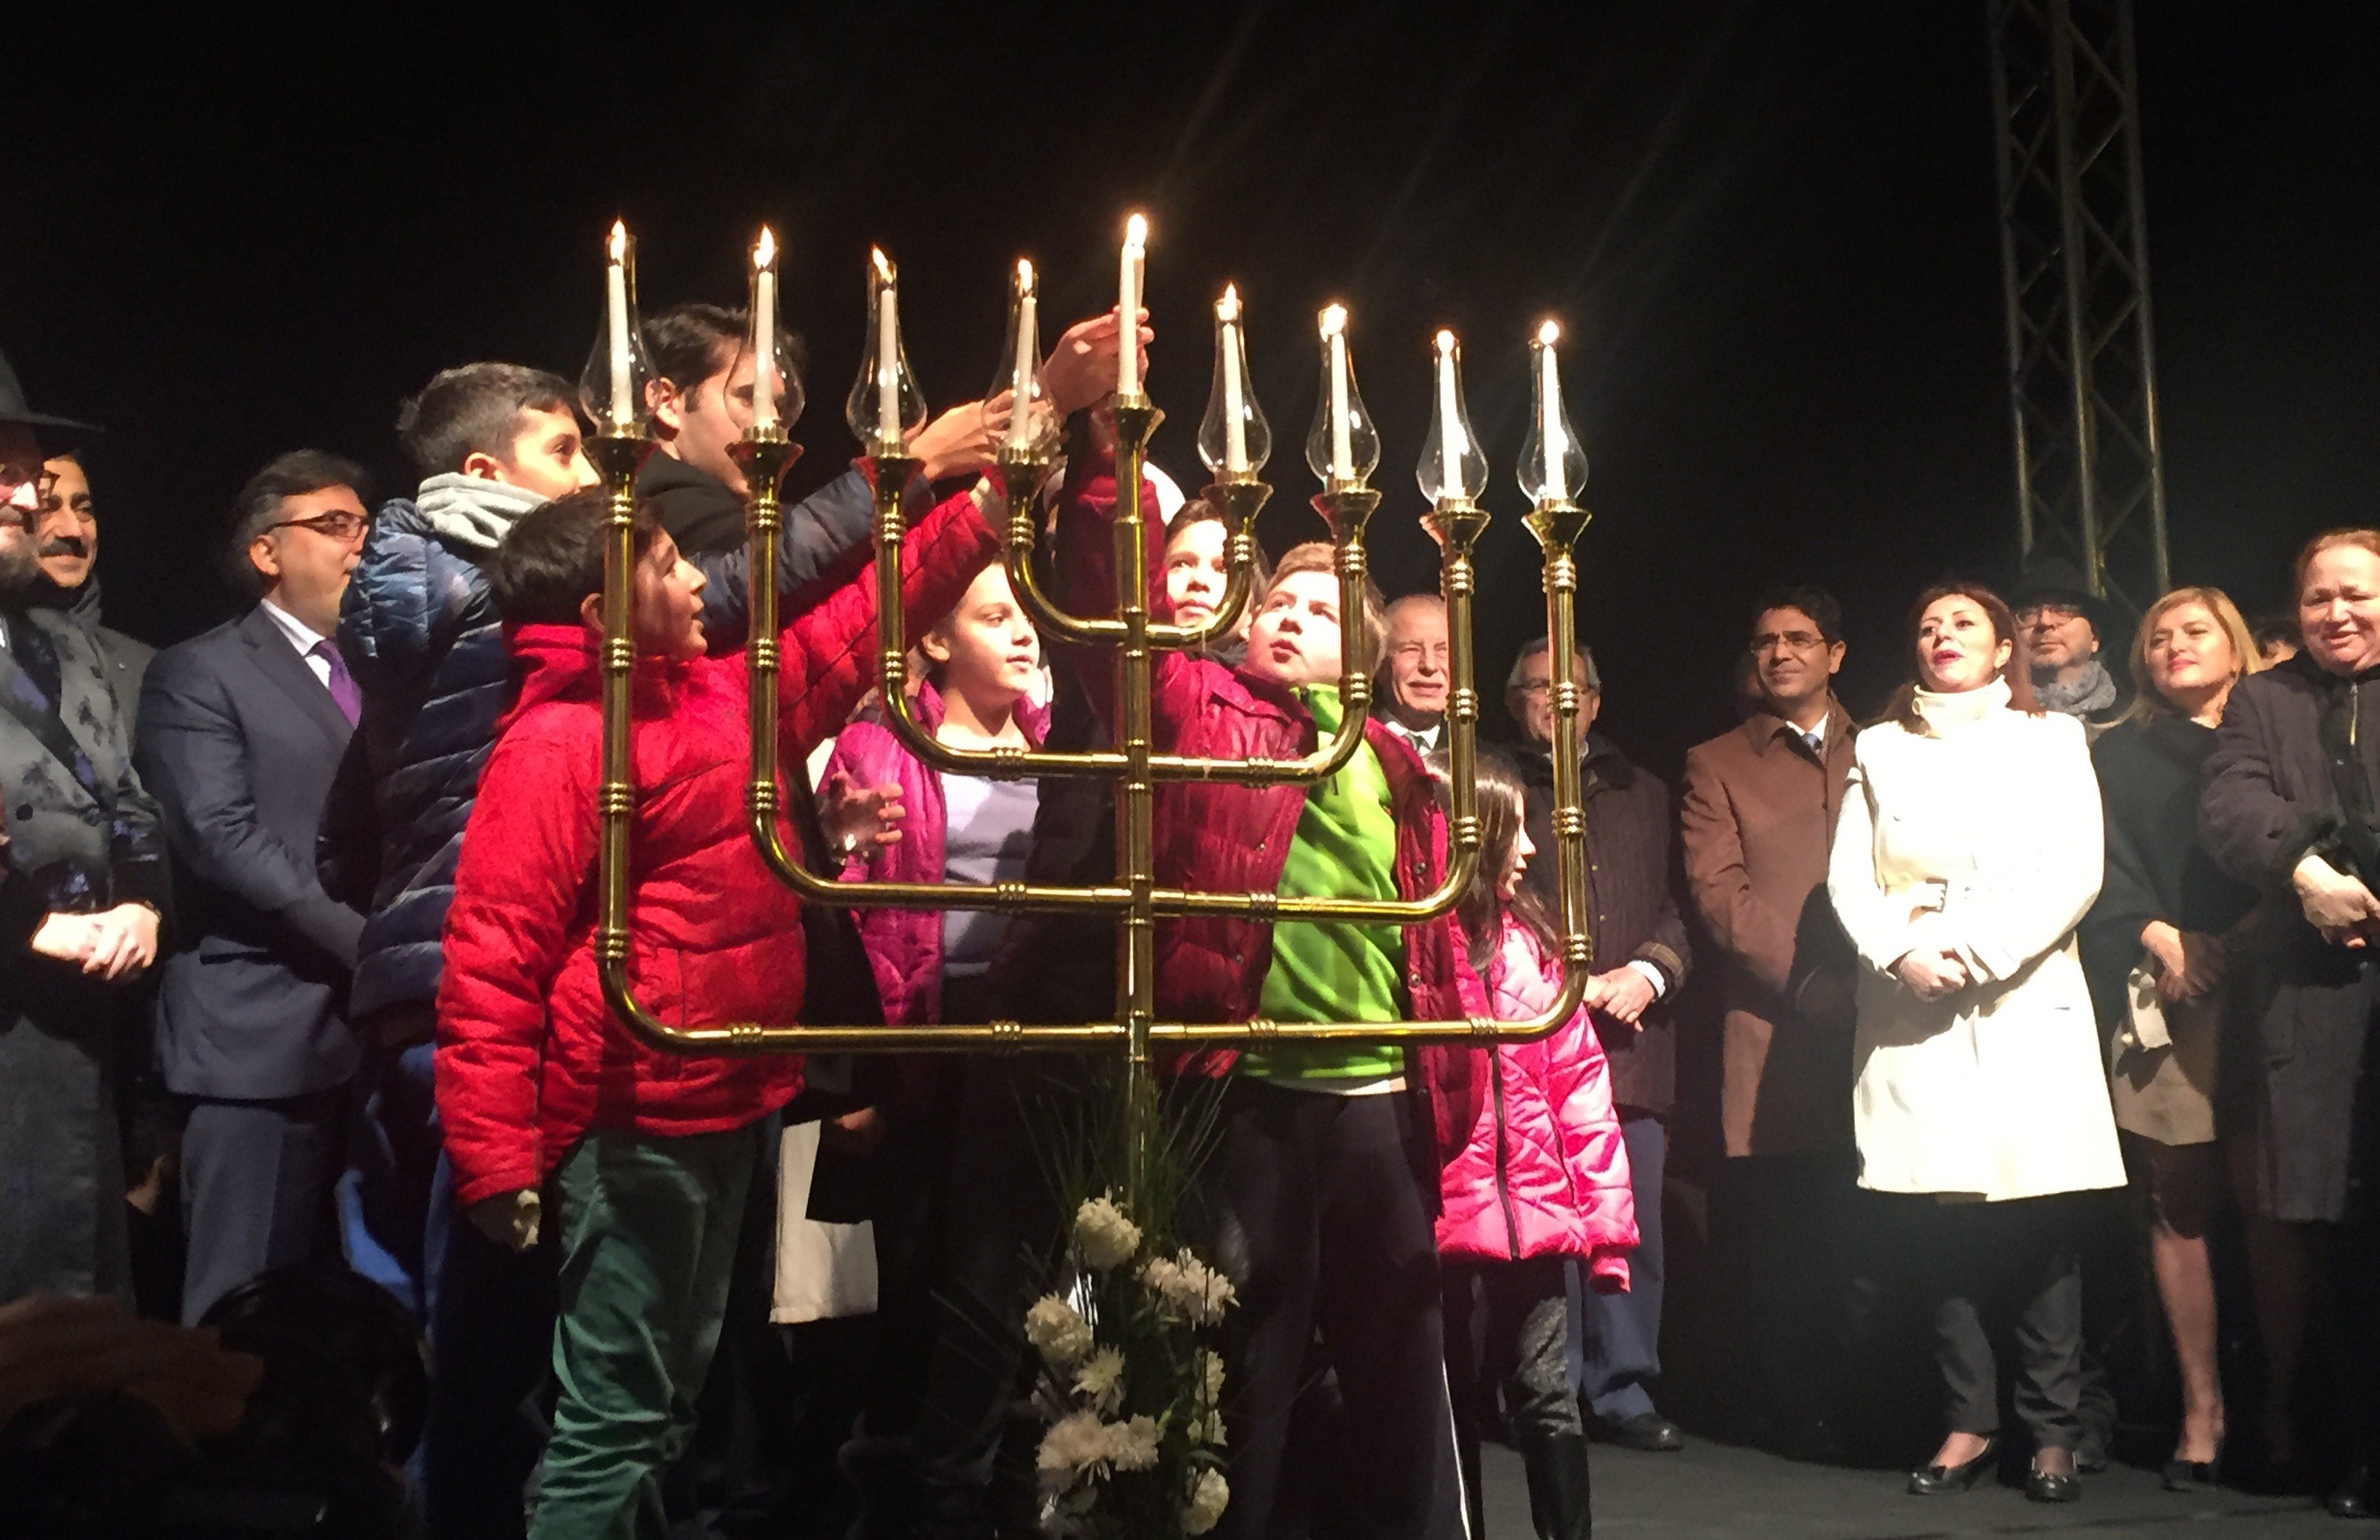 Hanukkah Celebrated at Public Square First Time in Turkey 